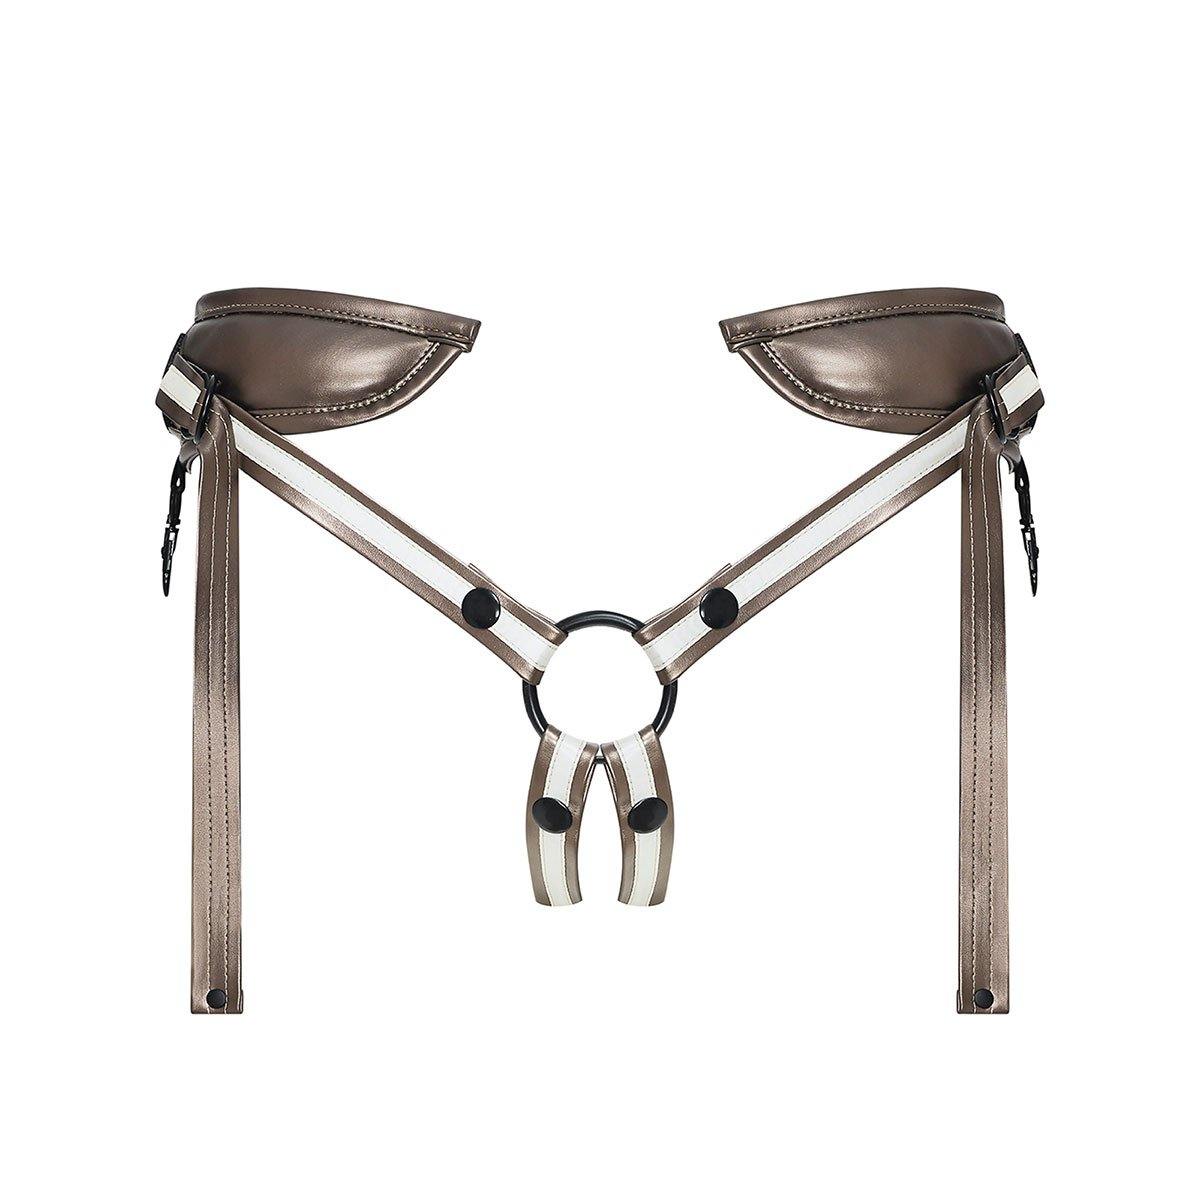 Strap-on-Me Desirous Harness Bronze - Buy At Luxury Toy X - Free 3-Day Shipping